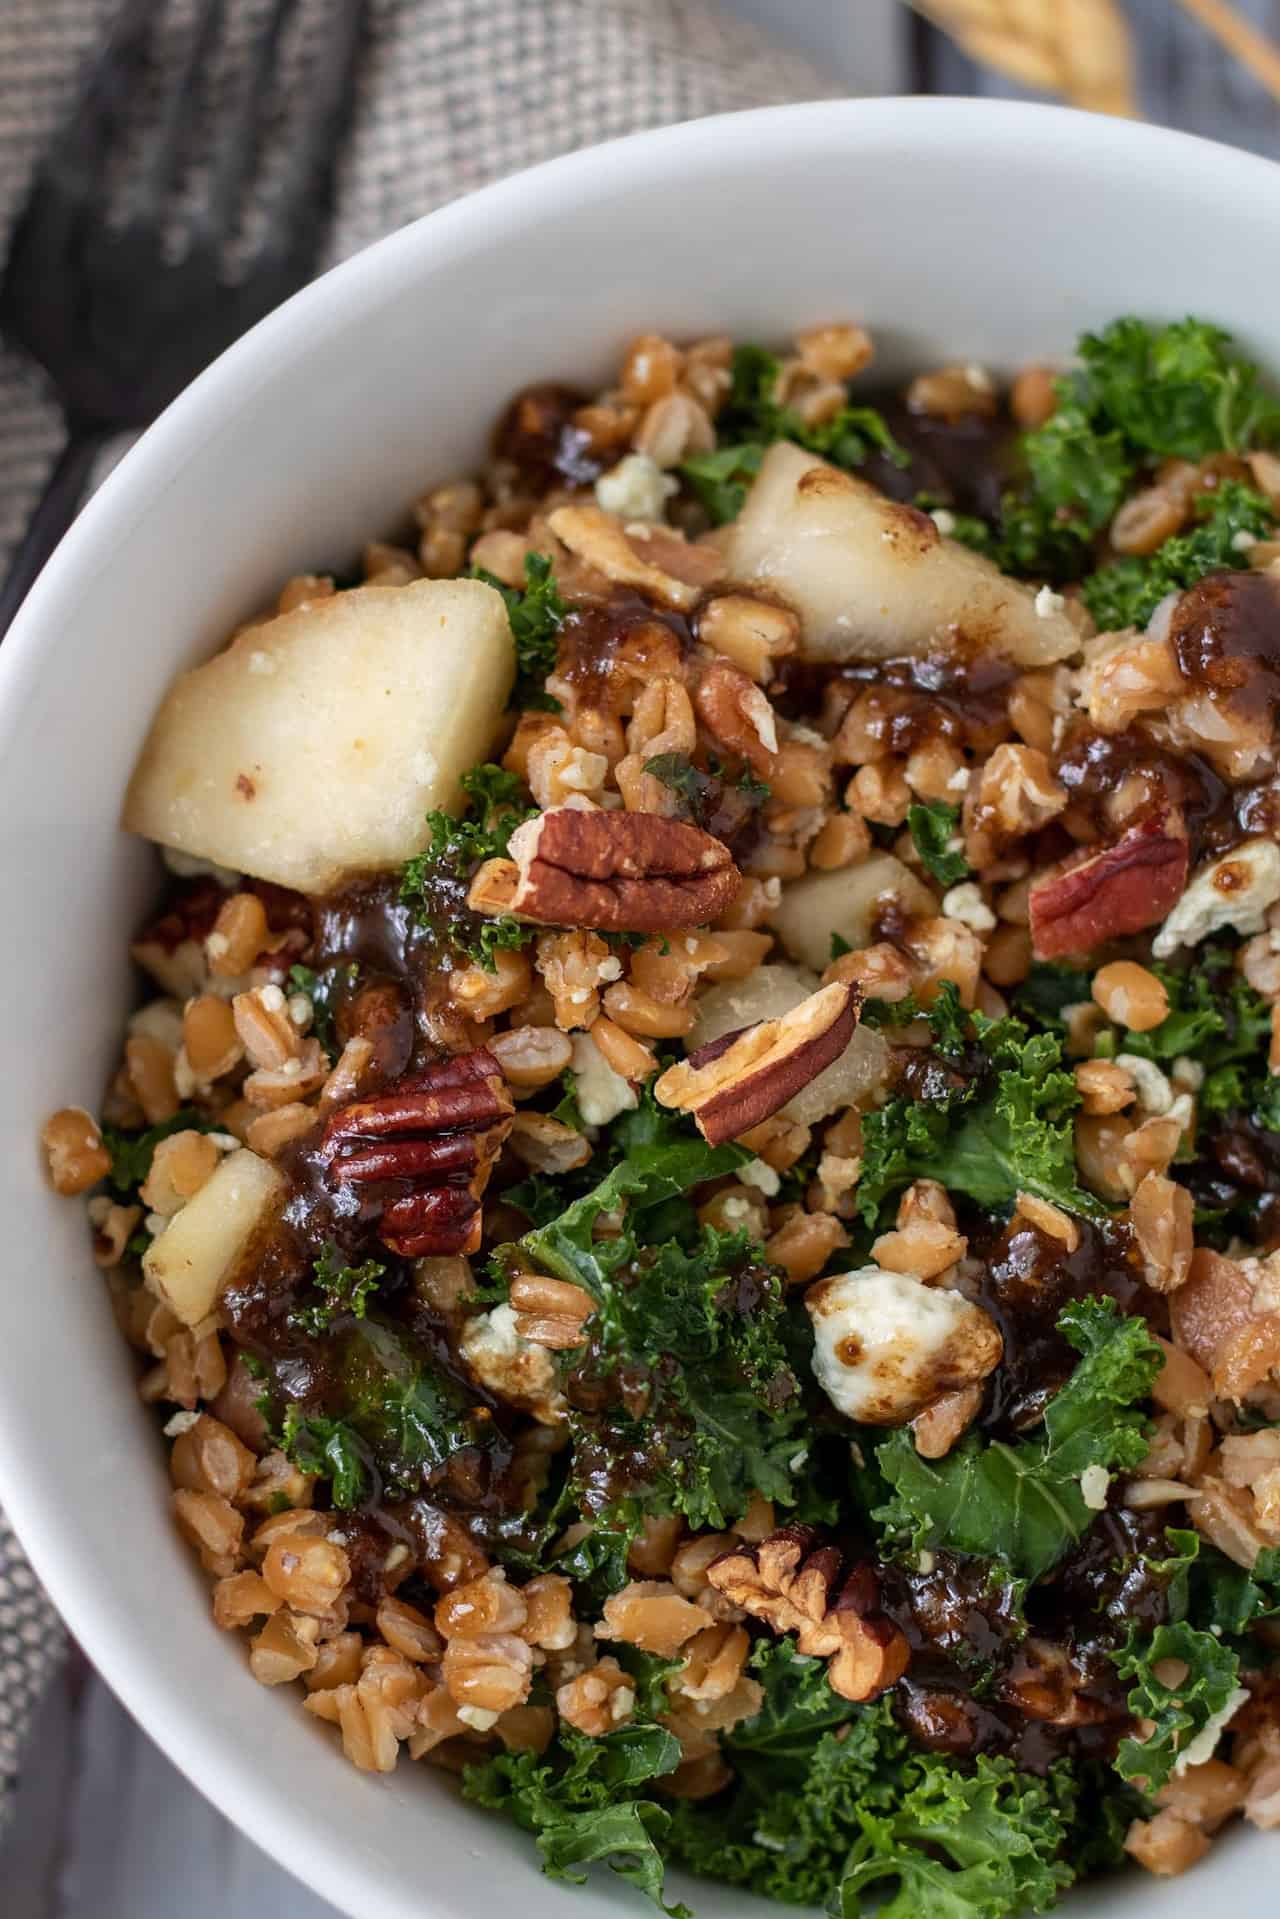 A white bowl filled with farro and kale salad with pecans, bacon, pears and Gorgonzola. There's a black fork next to the bowl.